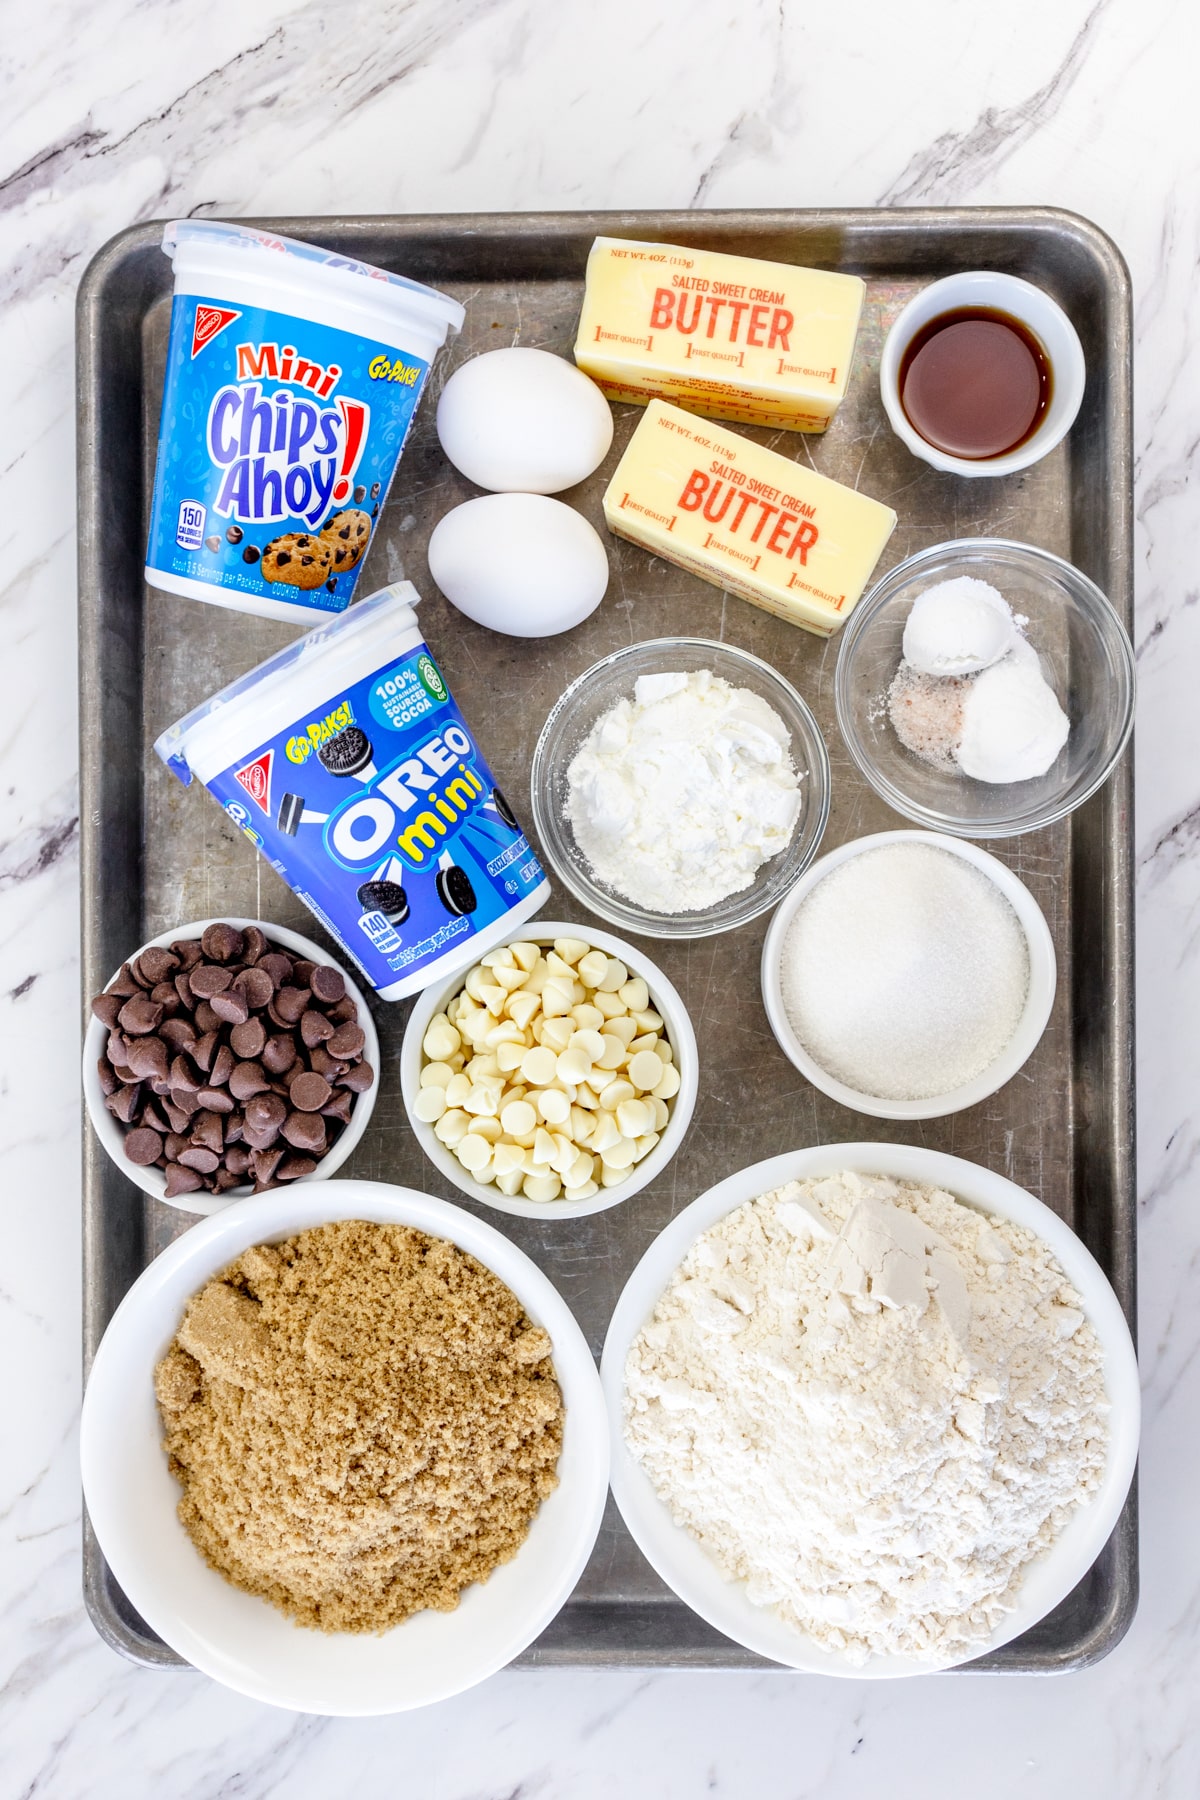 Top view of ingredients needed to make Cookie Monster Cookies in small bowls on a baking tray.